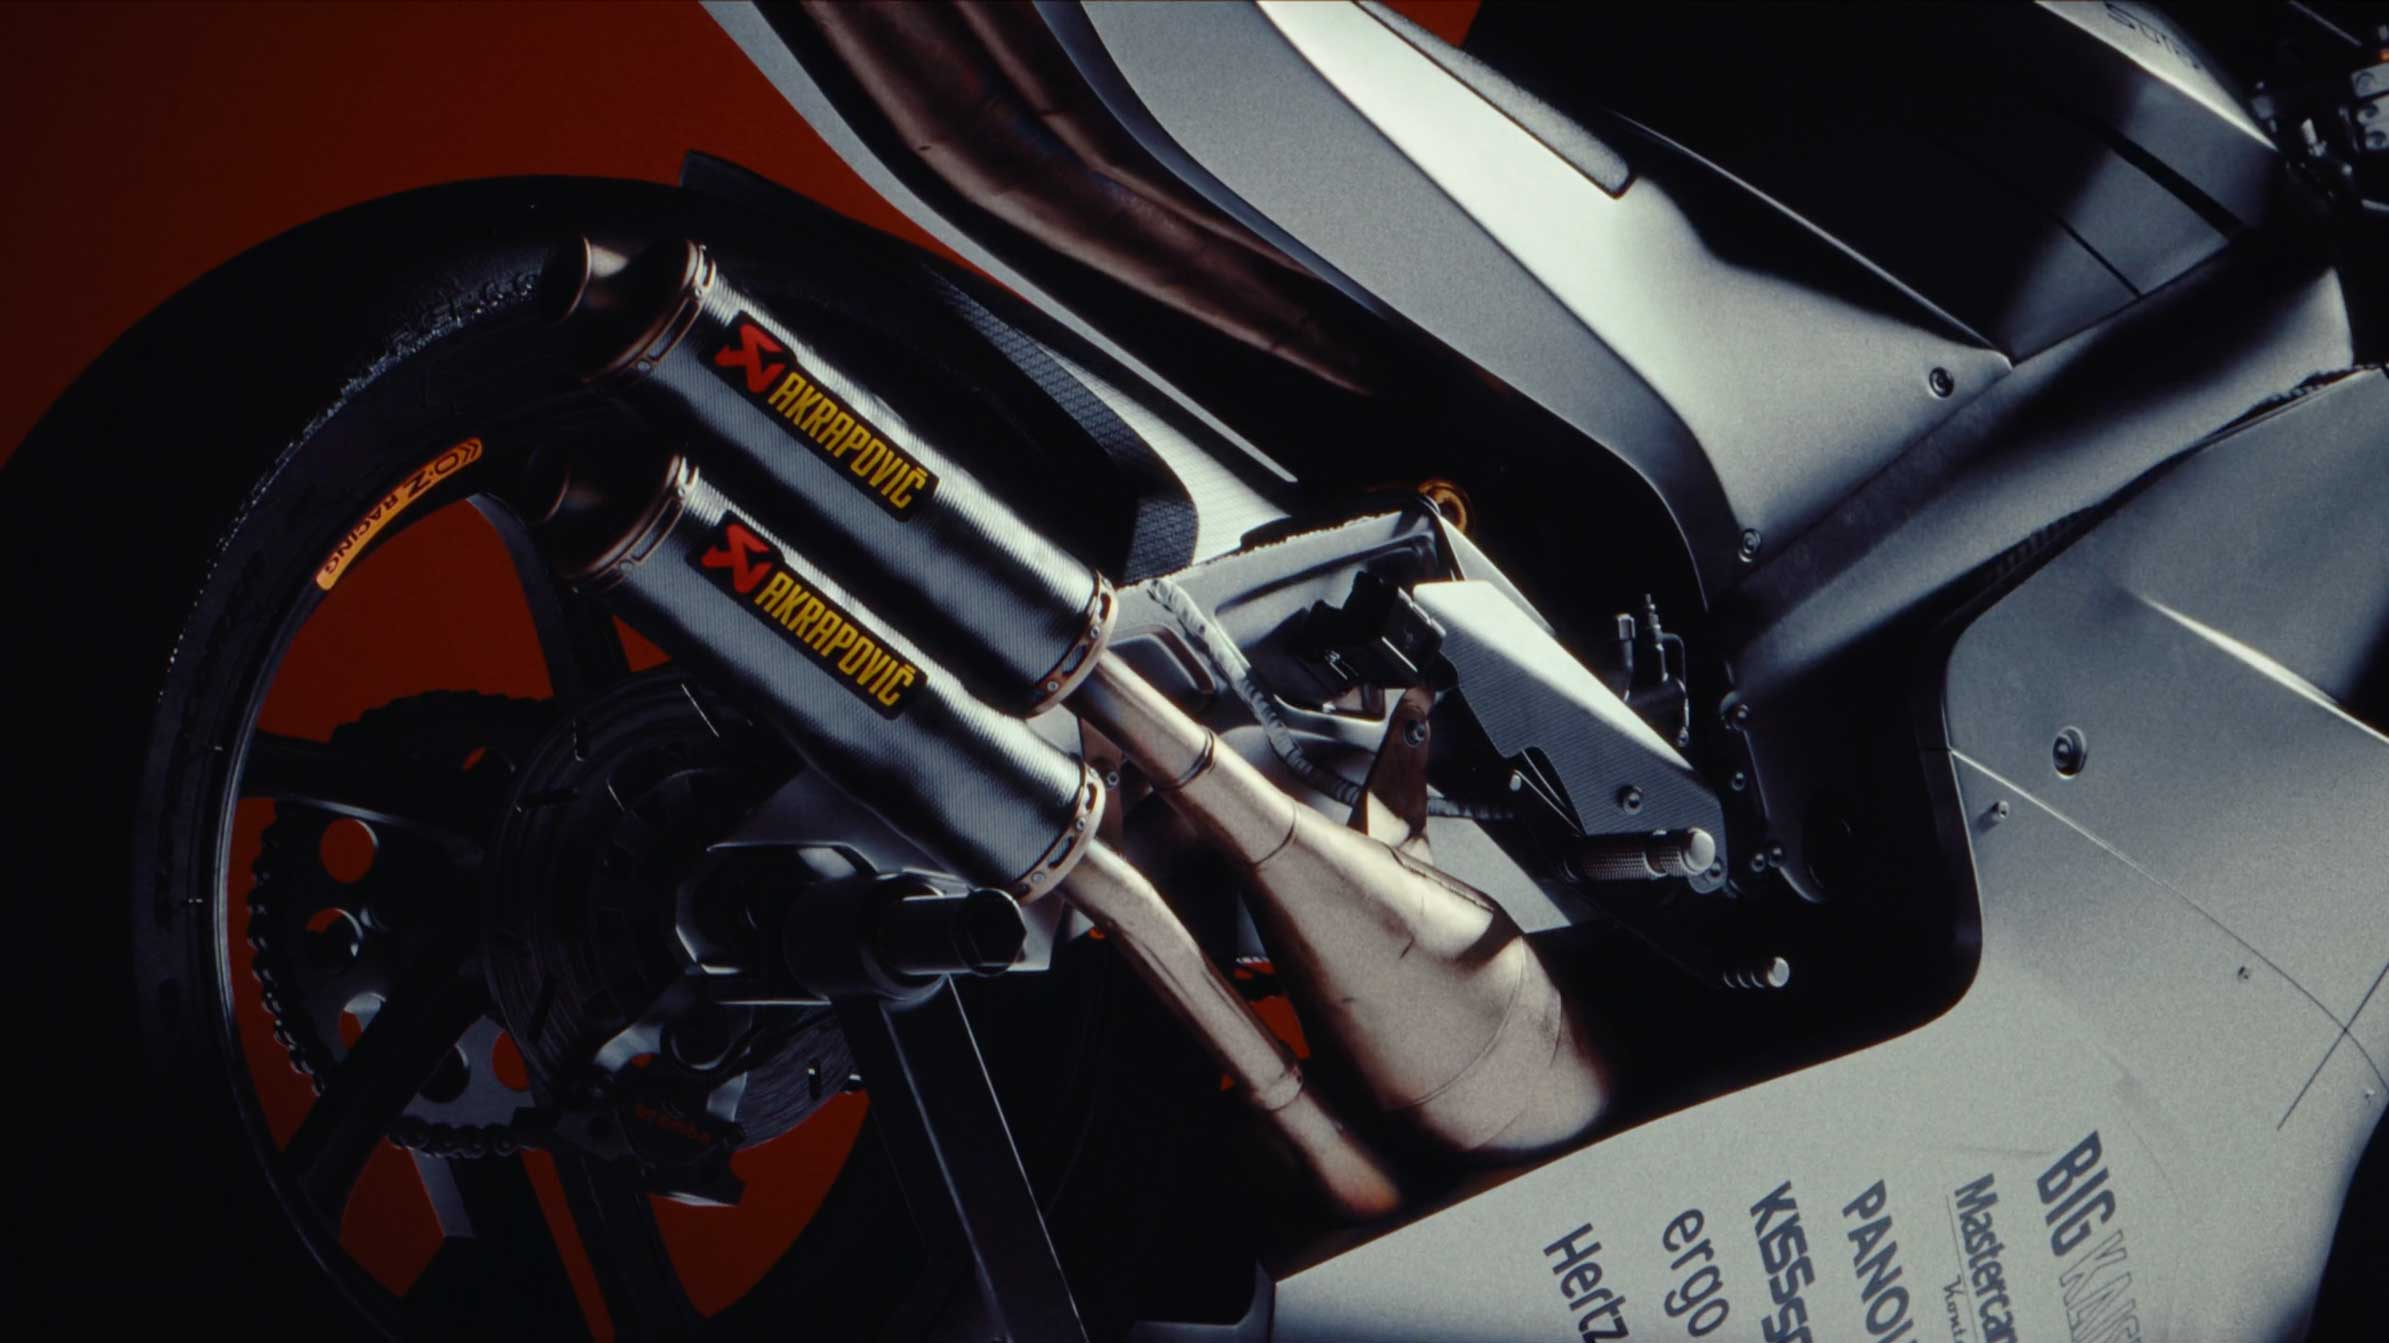 Suter MMX500 Racing Bike product film by Stance | STASH MAGAZINE